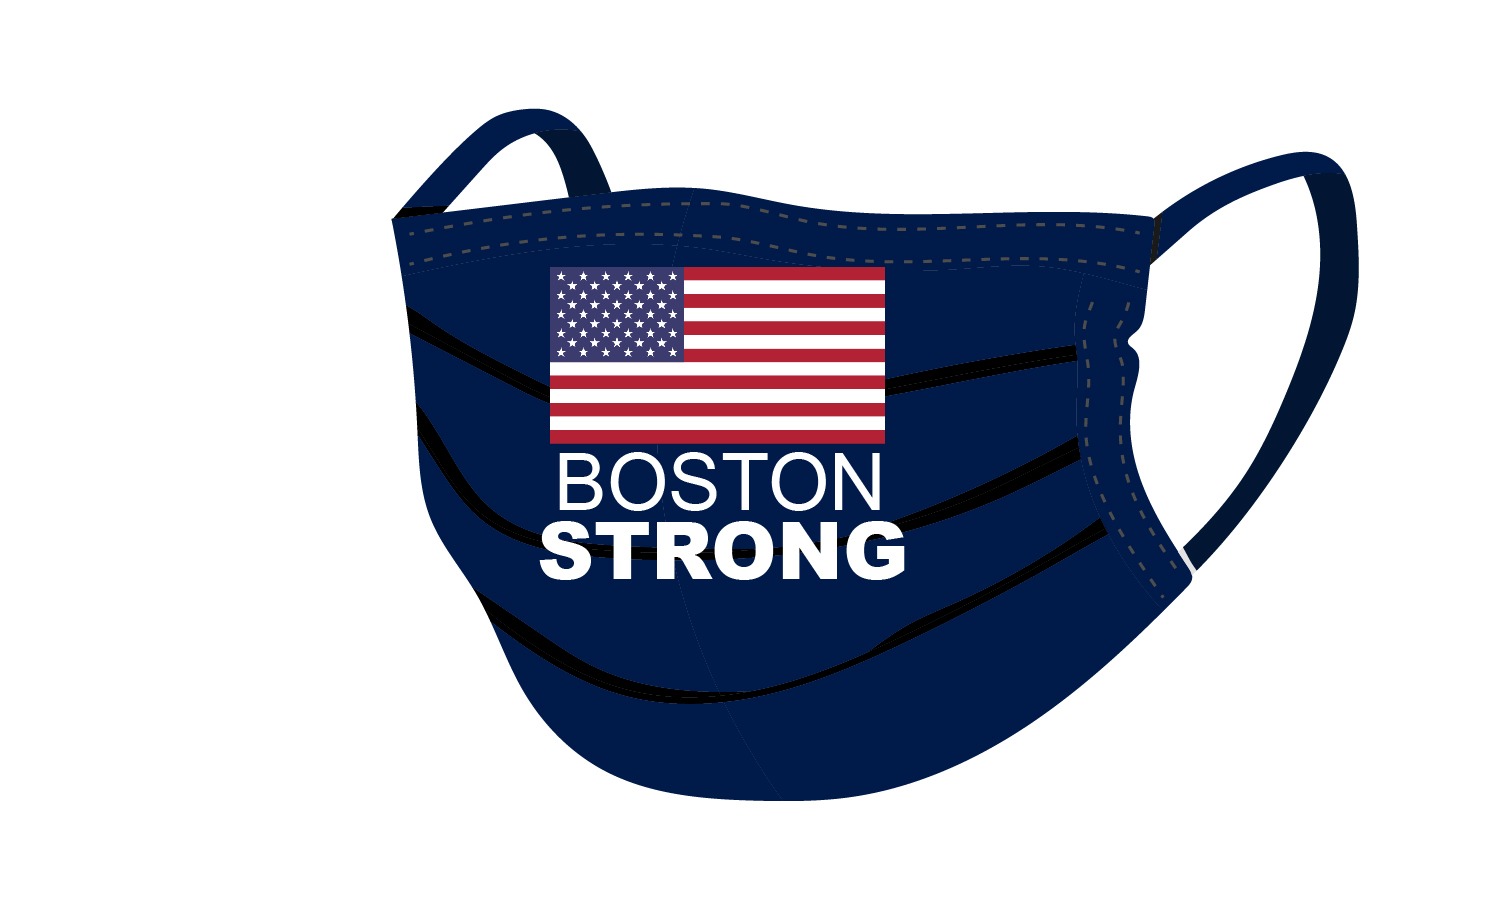 6821 BOSTON STRONG & USA FLAG WASHABLE & REUSABLE FACE COVERING MASK.